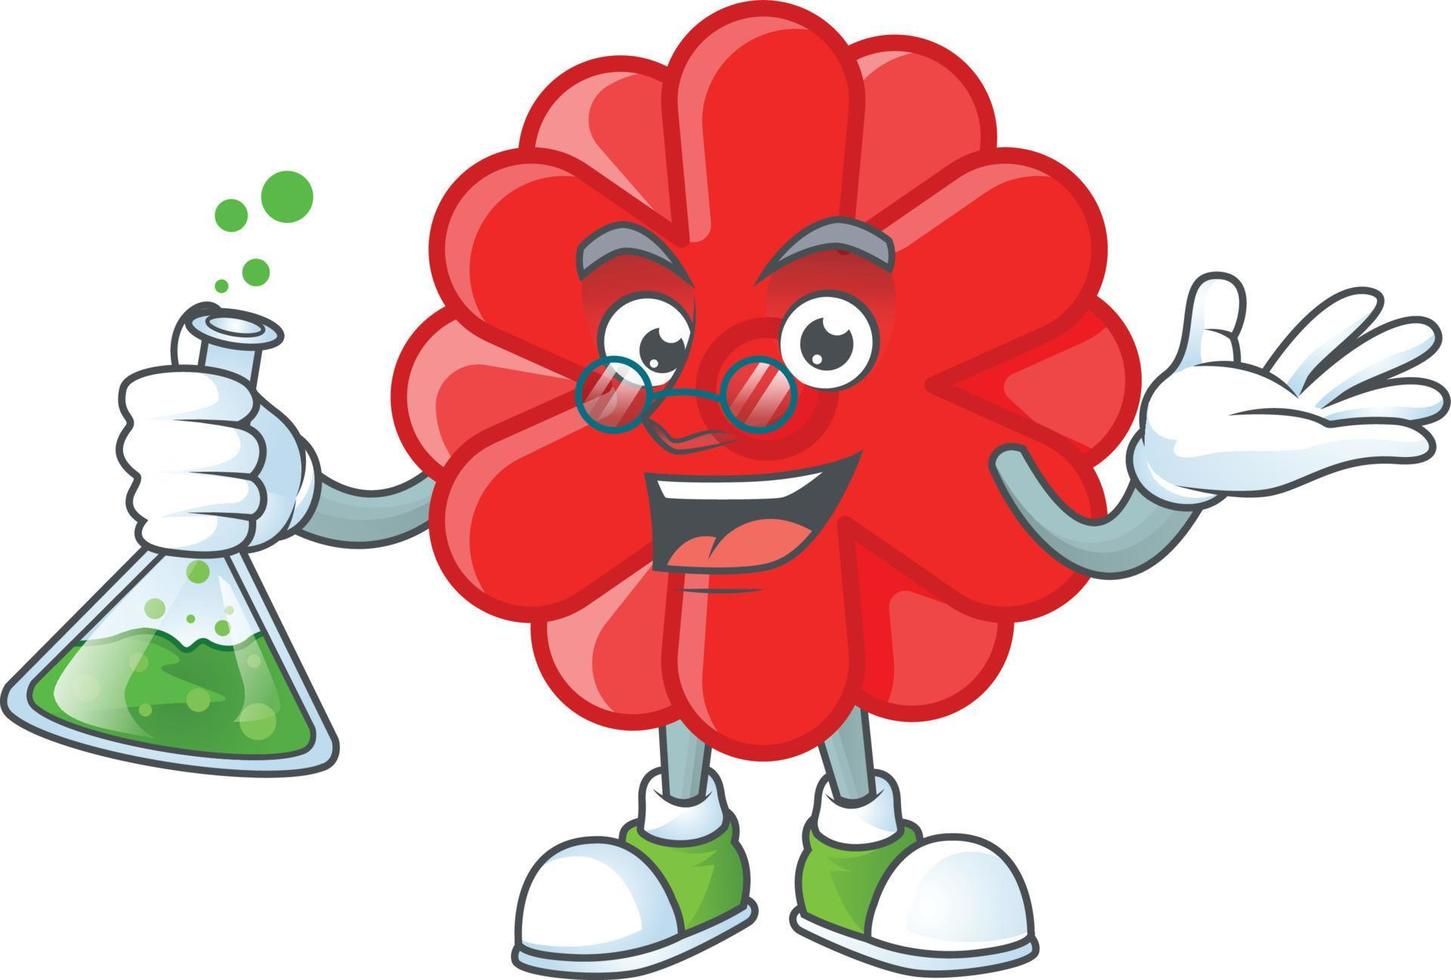 Chinese red flower cartoon character style vector